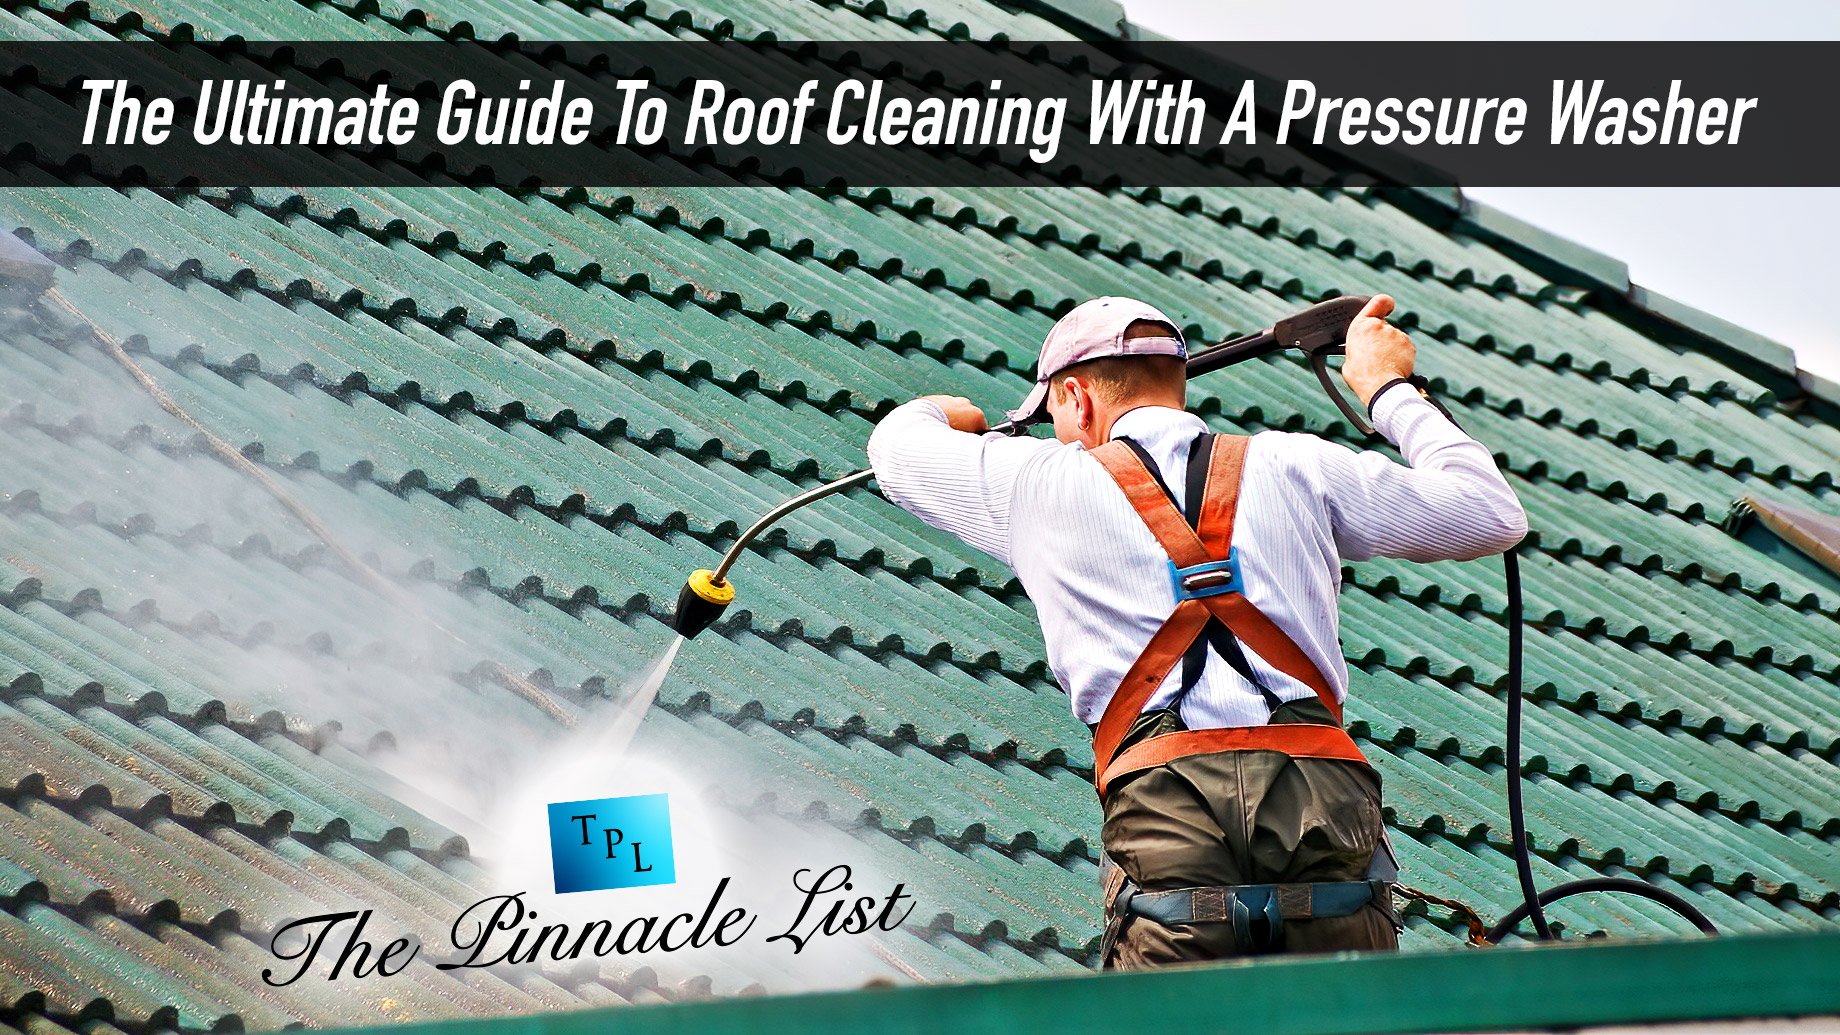 The Ultimate Guide To Roof Cleaning With A Pressure Washer